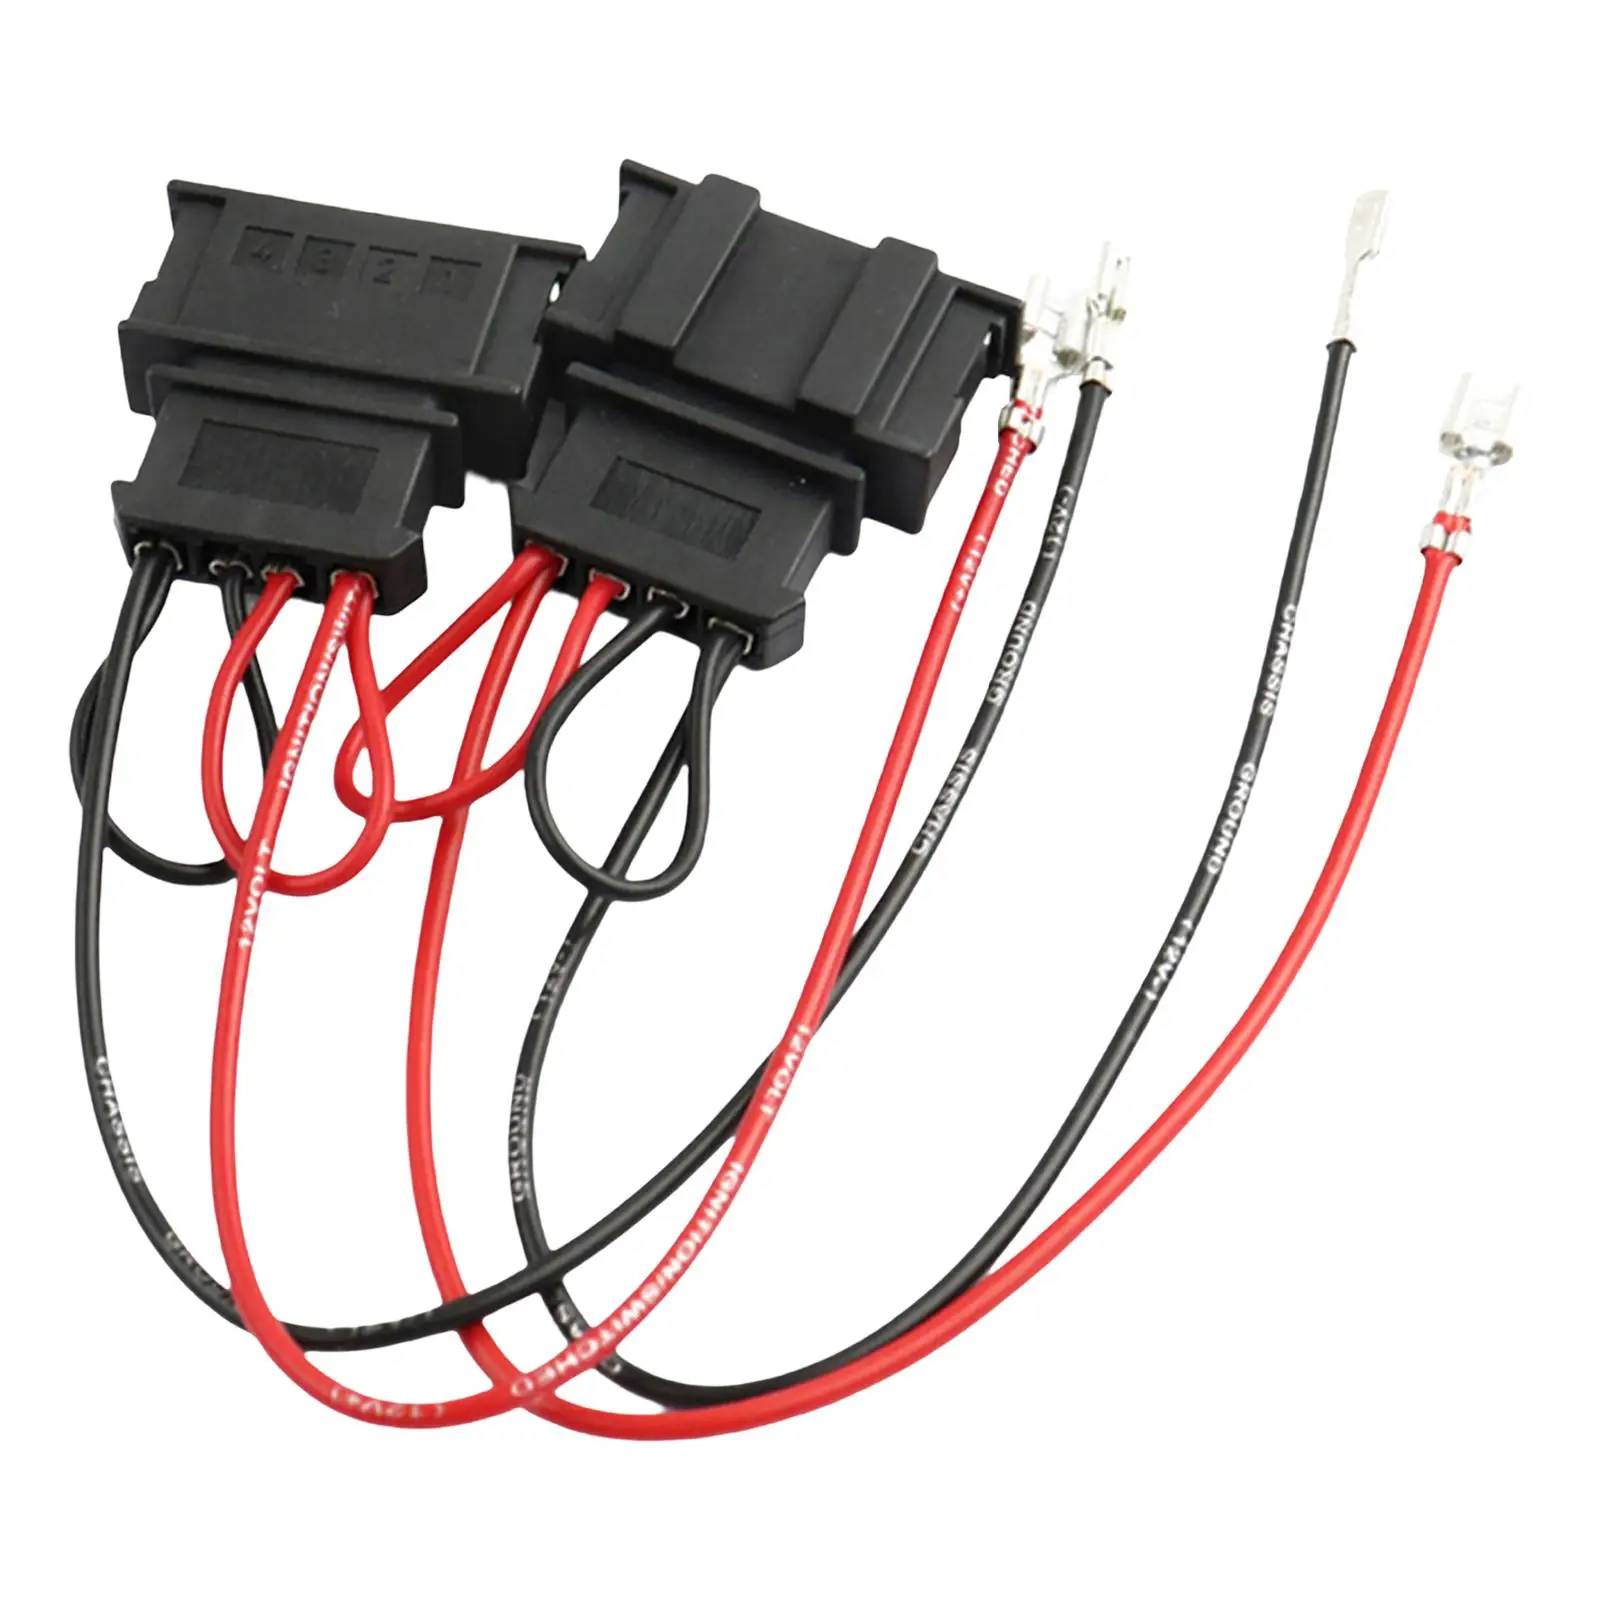 2x Car Speaker Wire Harness Adaptor Accessories Vehicle Wiring Plug for Golf